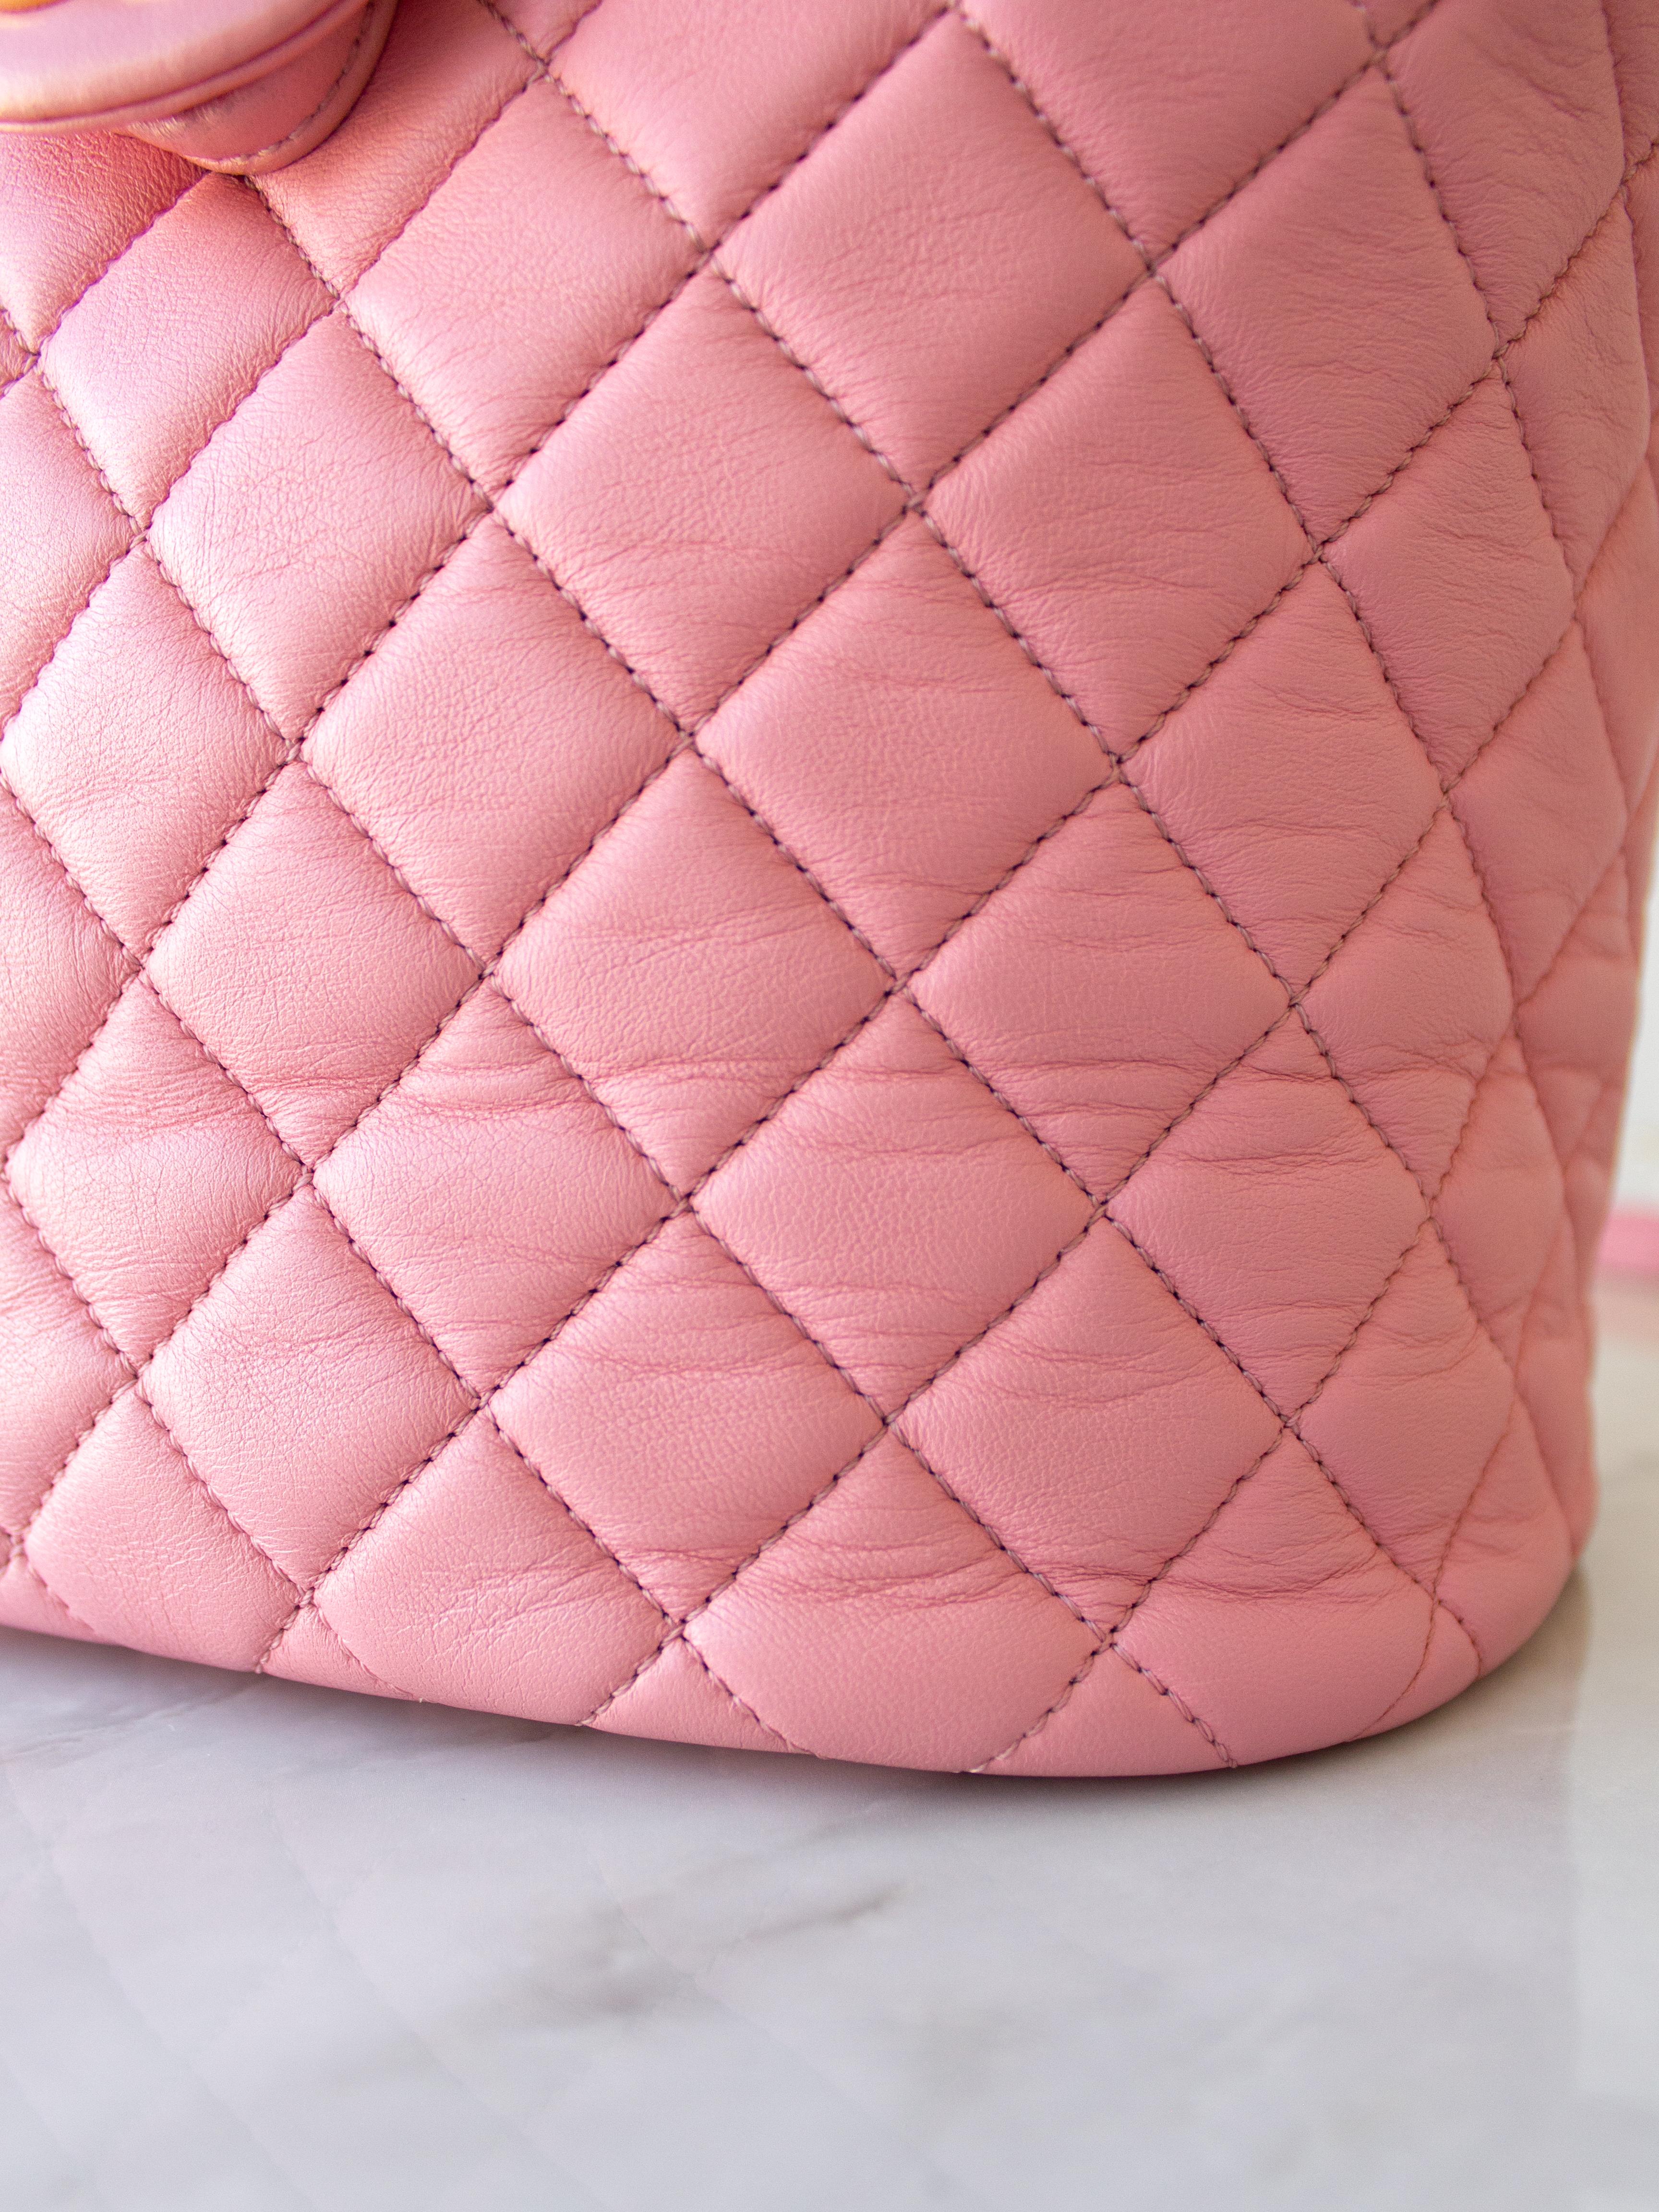 Women's or Men's Chanel Urban Spirit Pink Quilted Lambskin Leather Gold CC Backpack